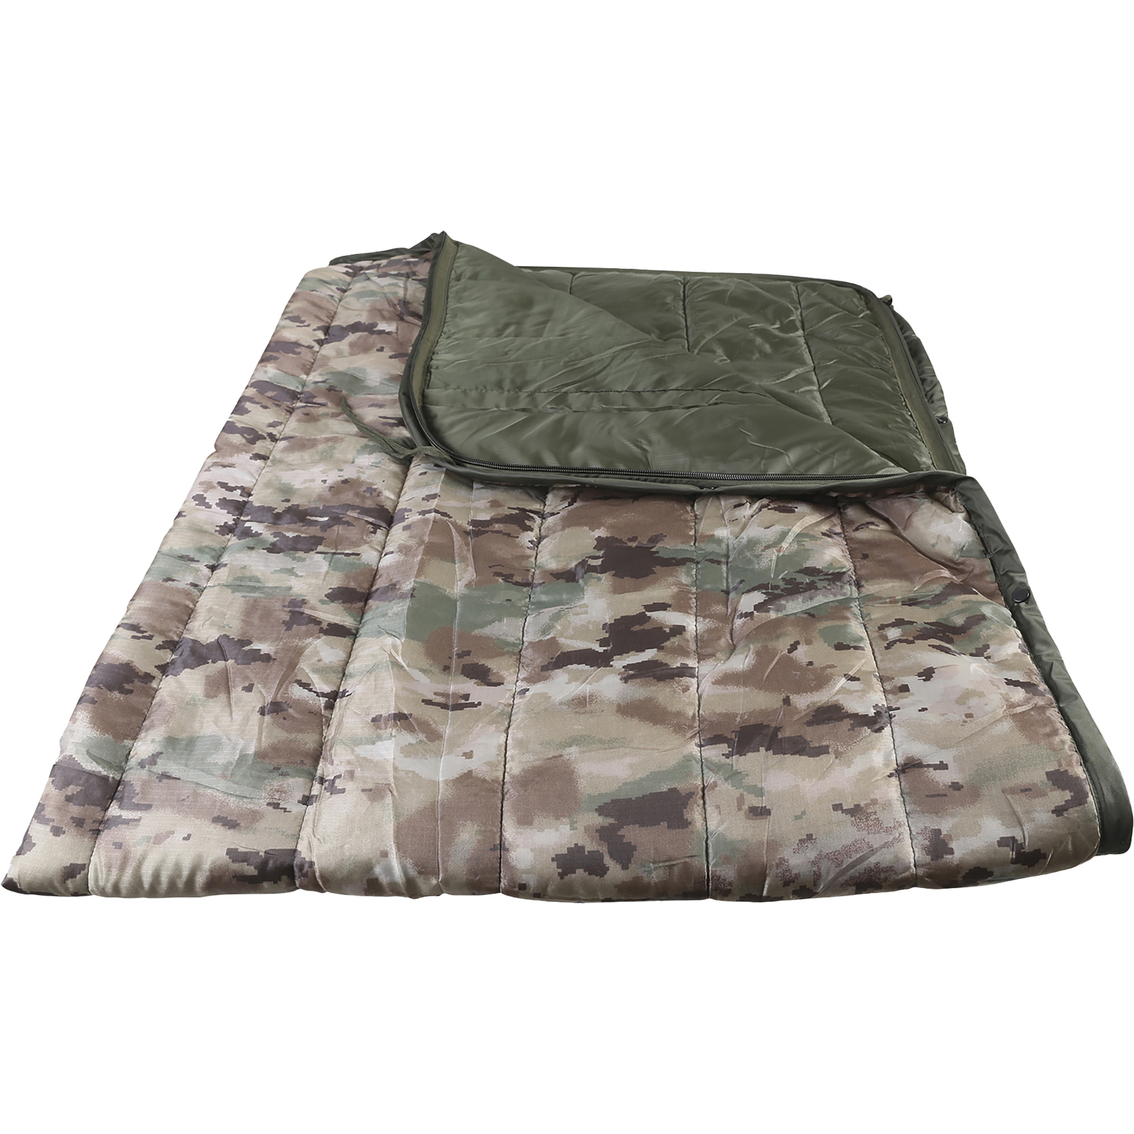 Brigade QM Woobie the Ultimate 3 in 1 Survival Quilted Blanket - Image 2 of 2